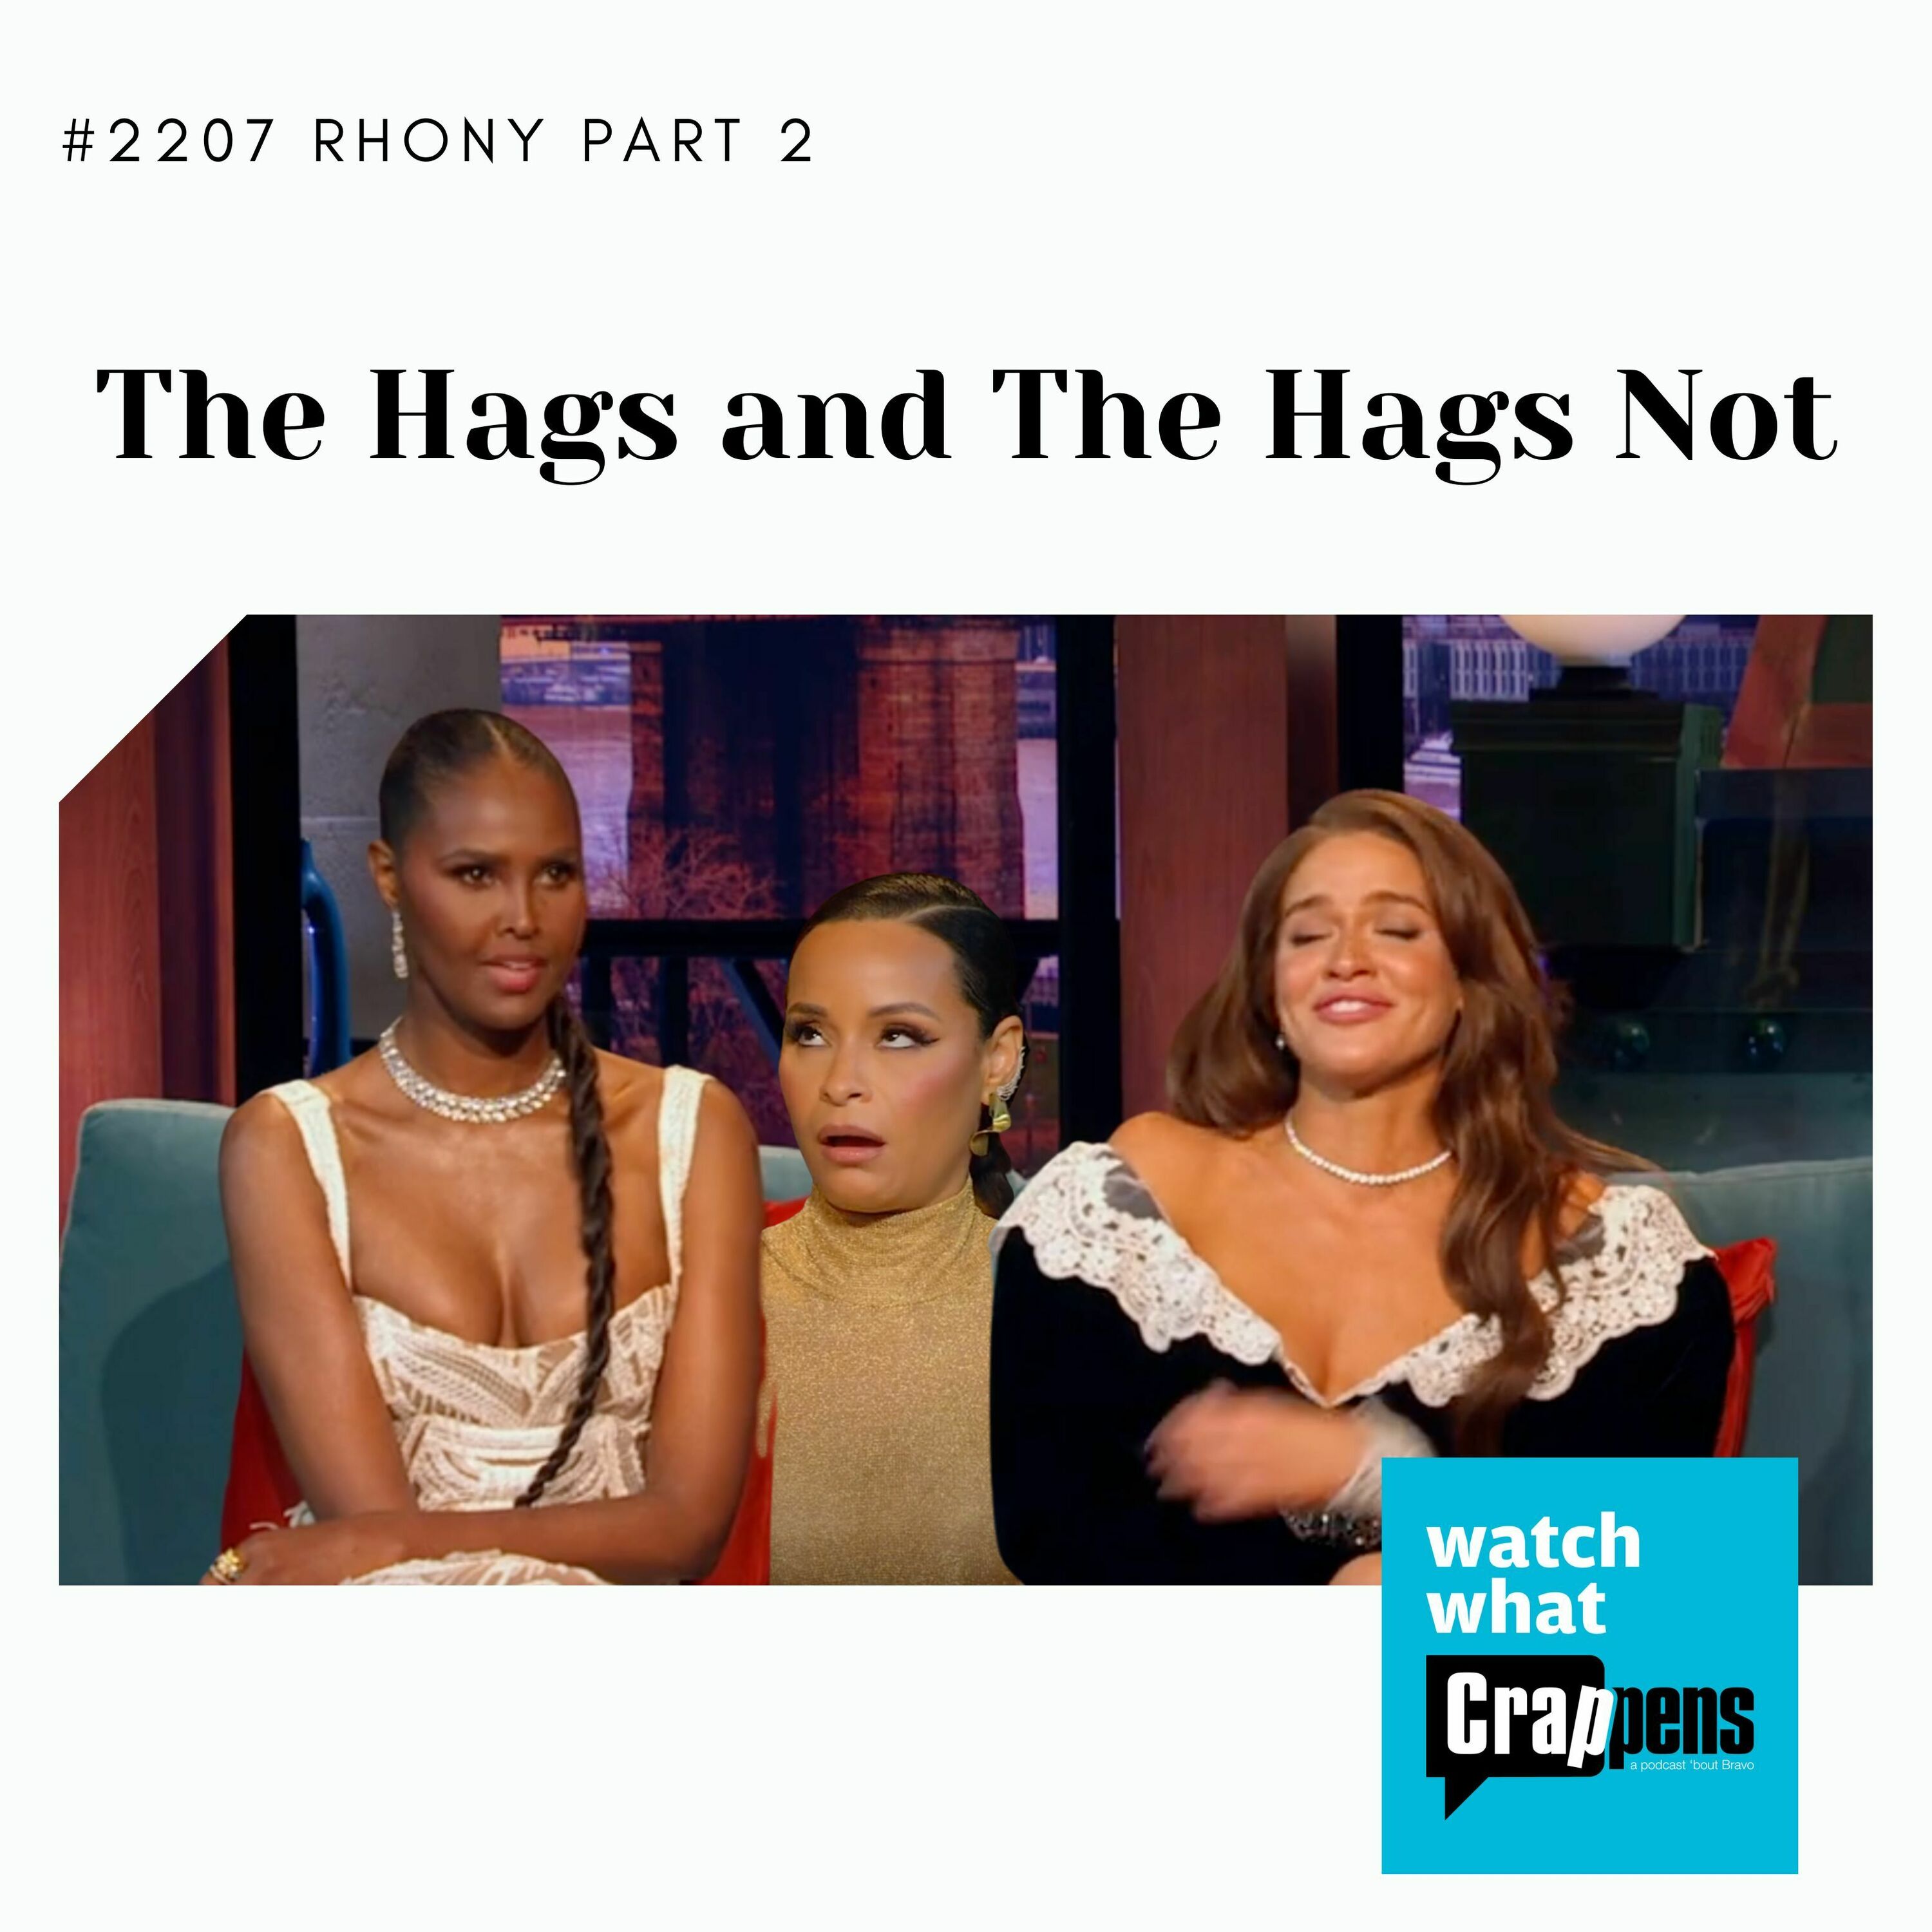 #2207 RHONY Part 2: The Hags and the Hags Not